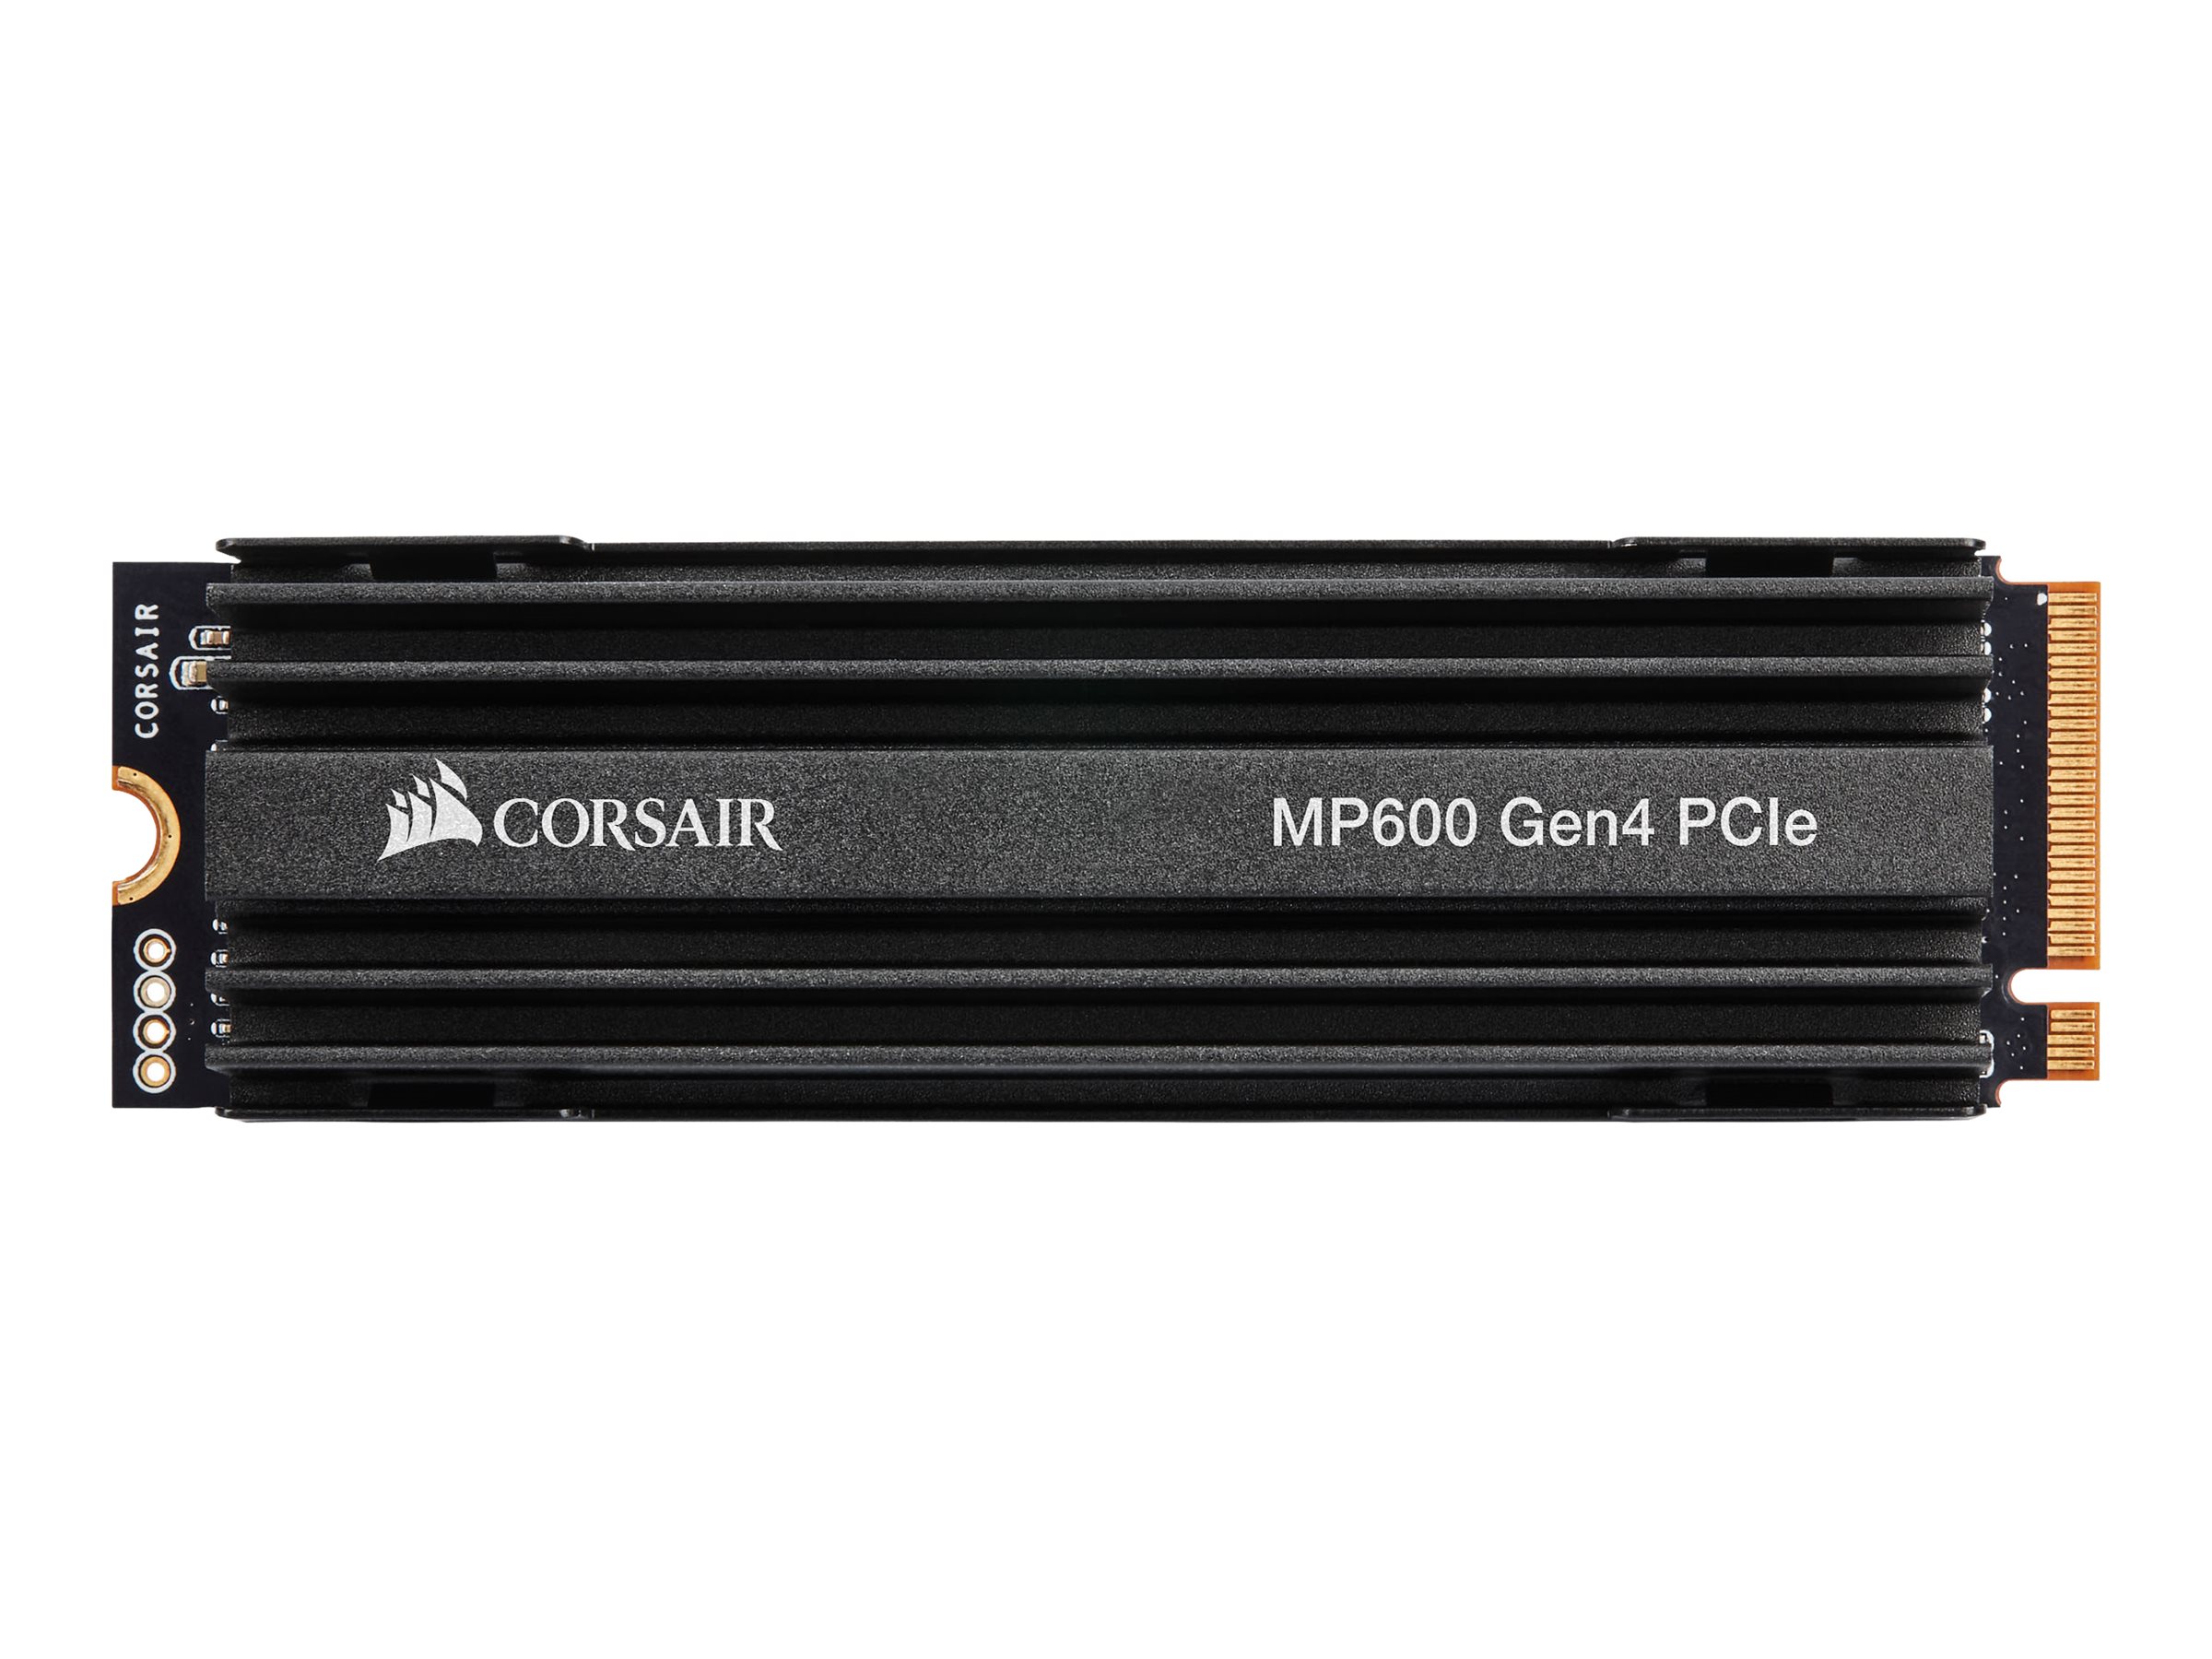 CORSAIR Force Series MP600 - SSD - 1 TB - internal - M.2 2280 - PCIe 4.0 x4 (NVMe) - 256-bit AES - integrated heatsink - for Intel Next Unit of Computing 12, 13 - image 1 of 6